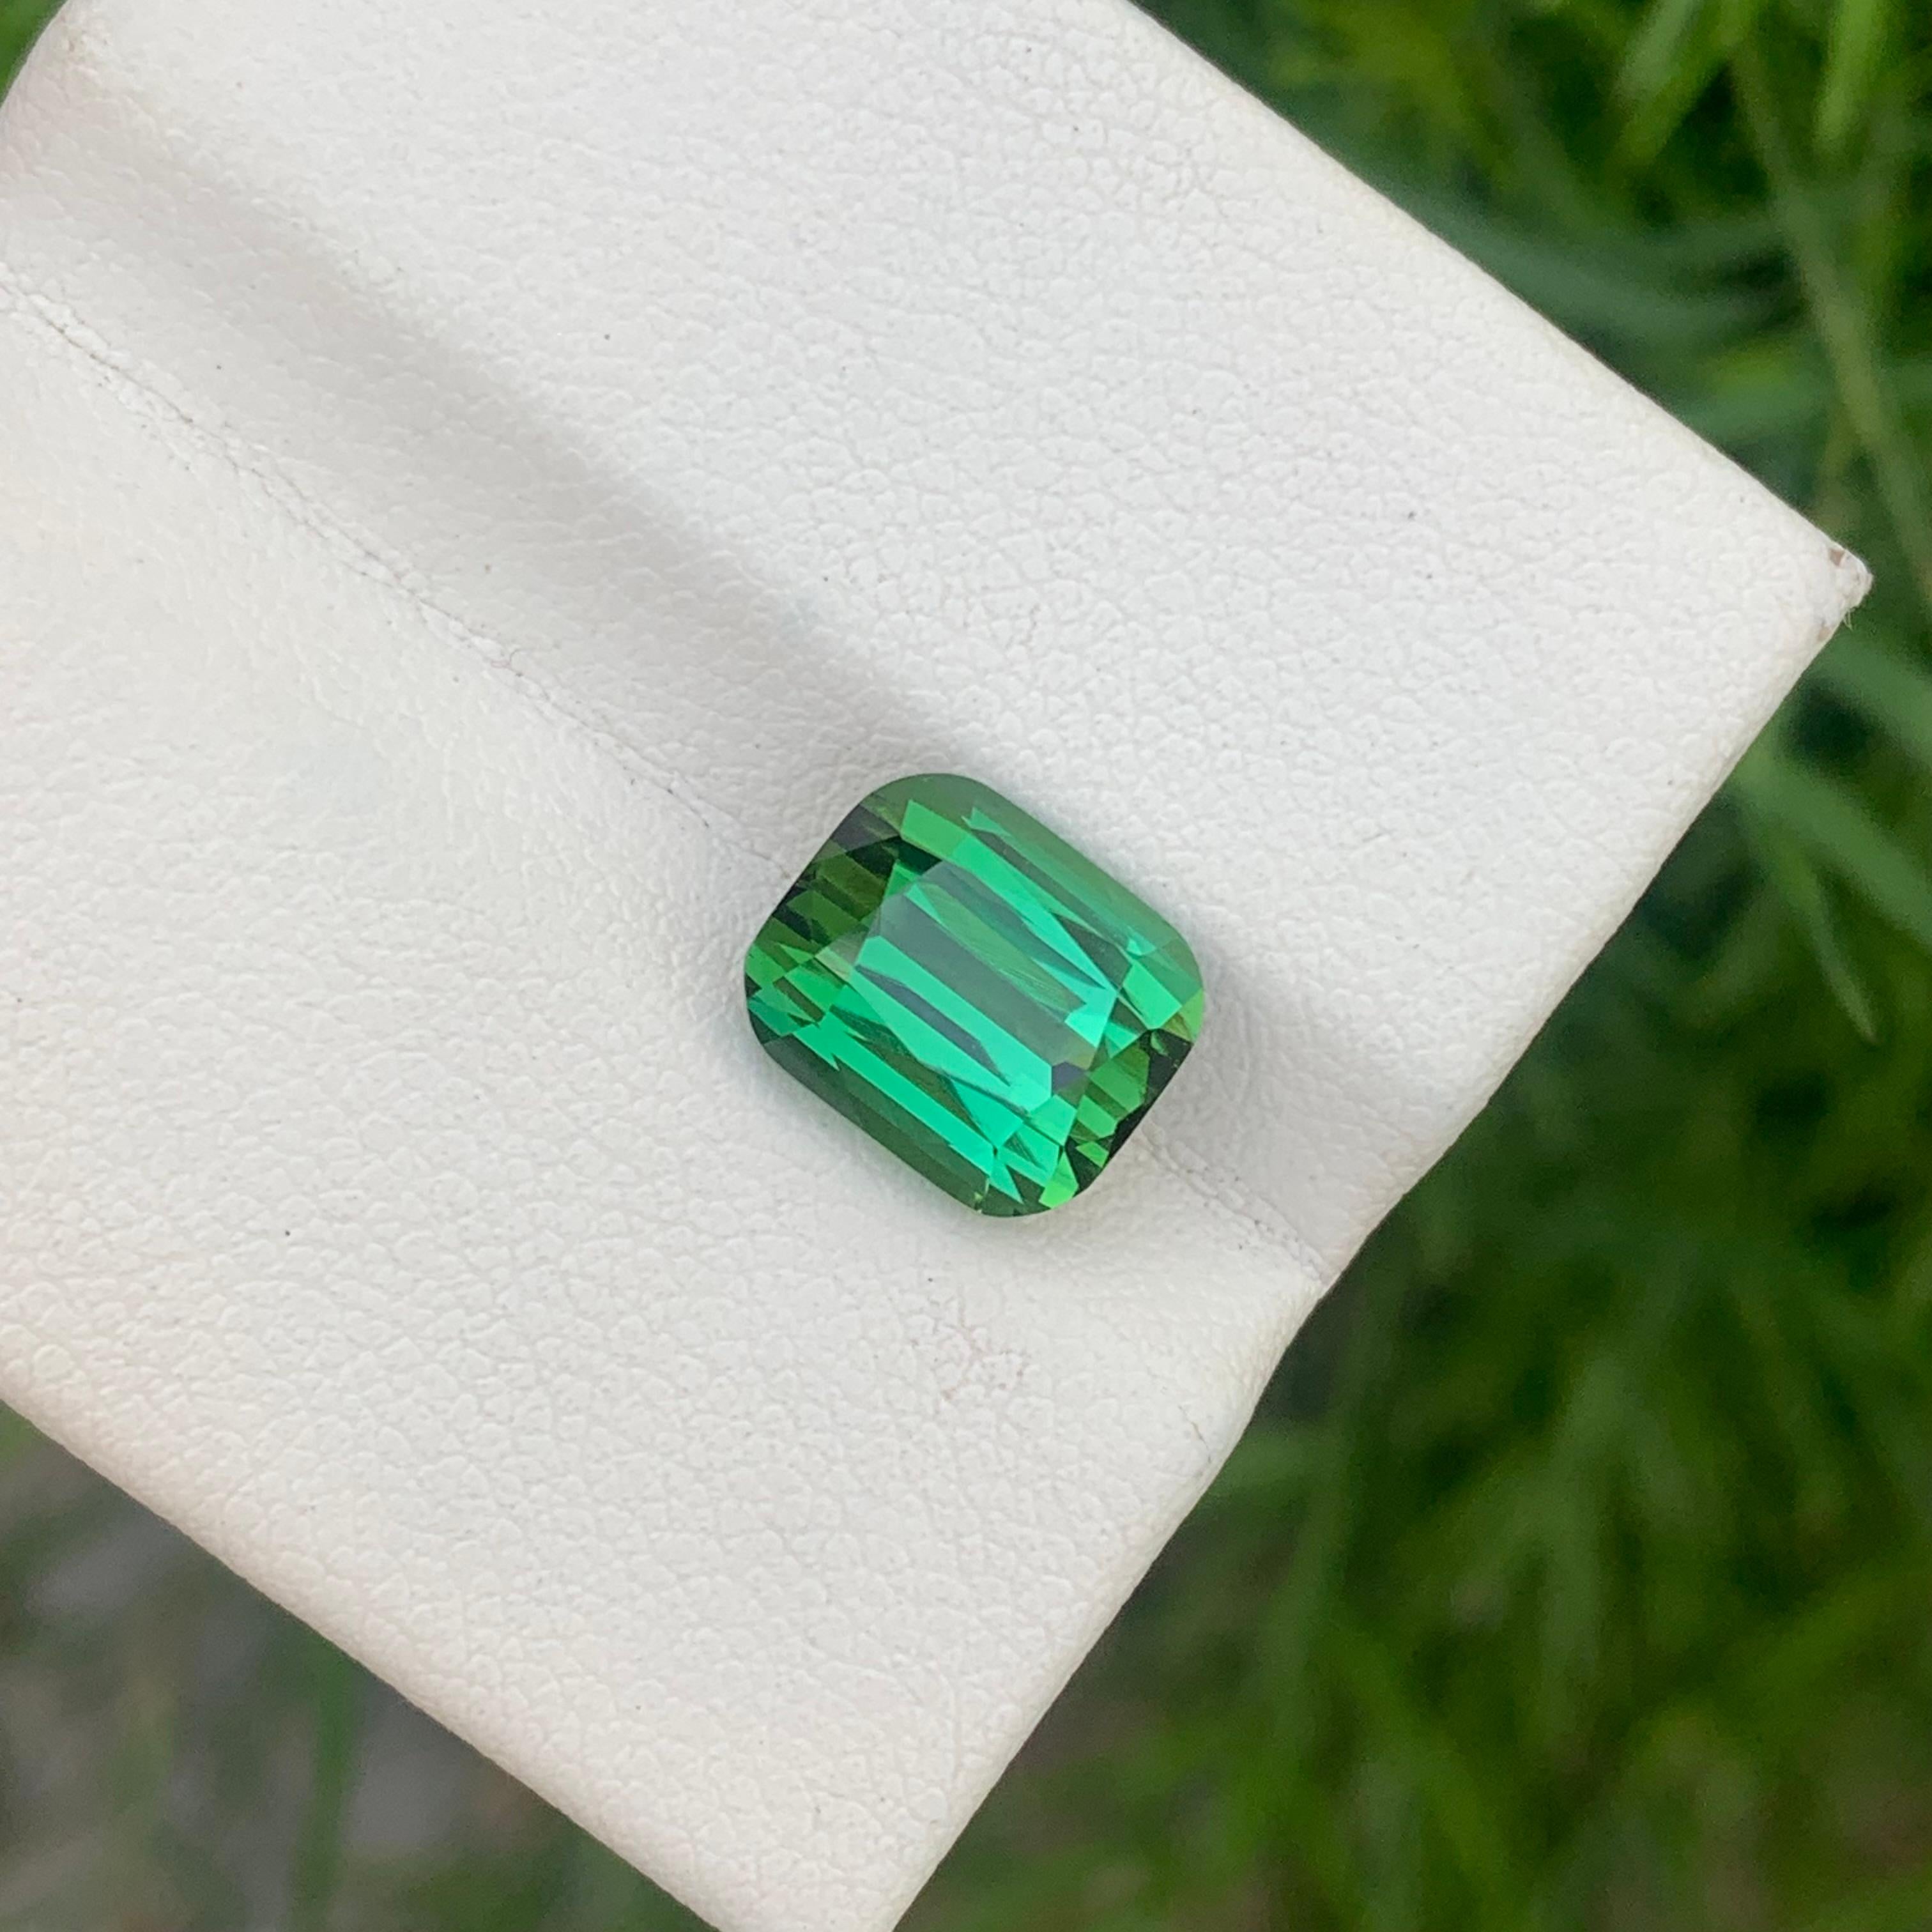 Loose Tourmaline 
Weight: 4.85 Carats
Dimension: 9.7x8.2x7 Mm
Origin: Kunar Afghanistan 
Shape: Cushion
Treatment; Non
Certificate; On Demand
Tourmaline is a diverse and captivating gemstone known for its wide range of colors, transparency, and